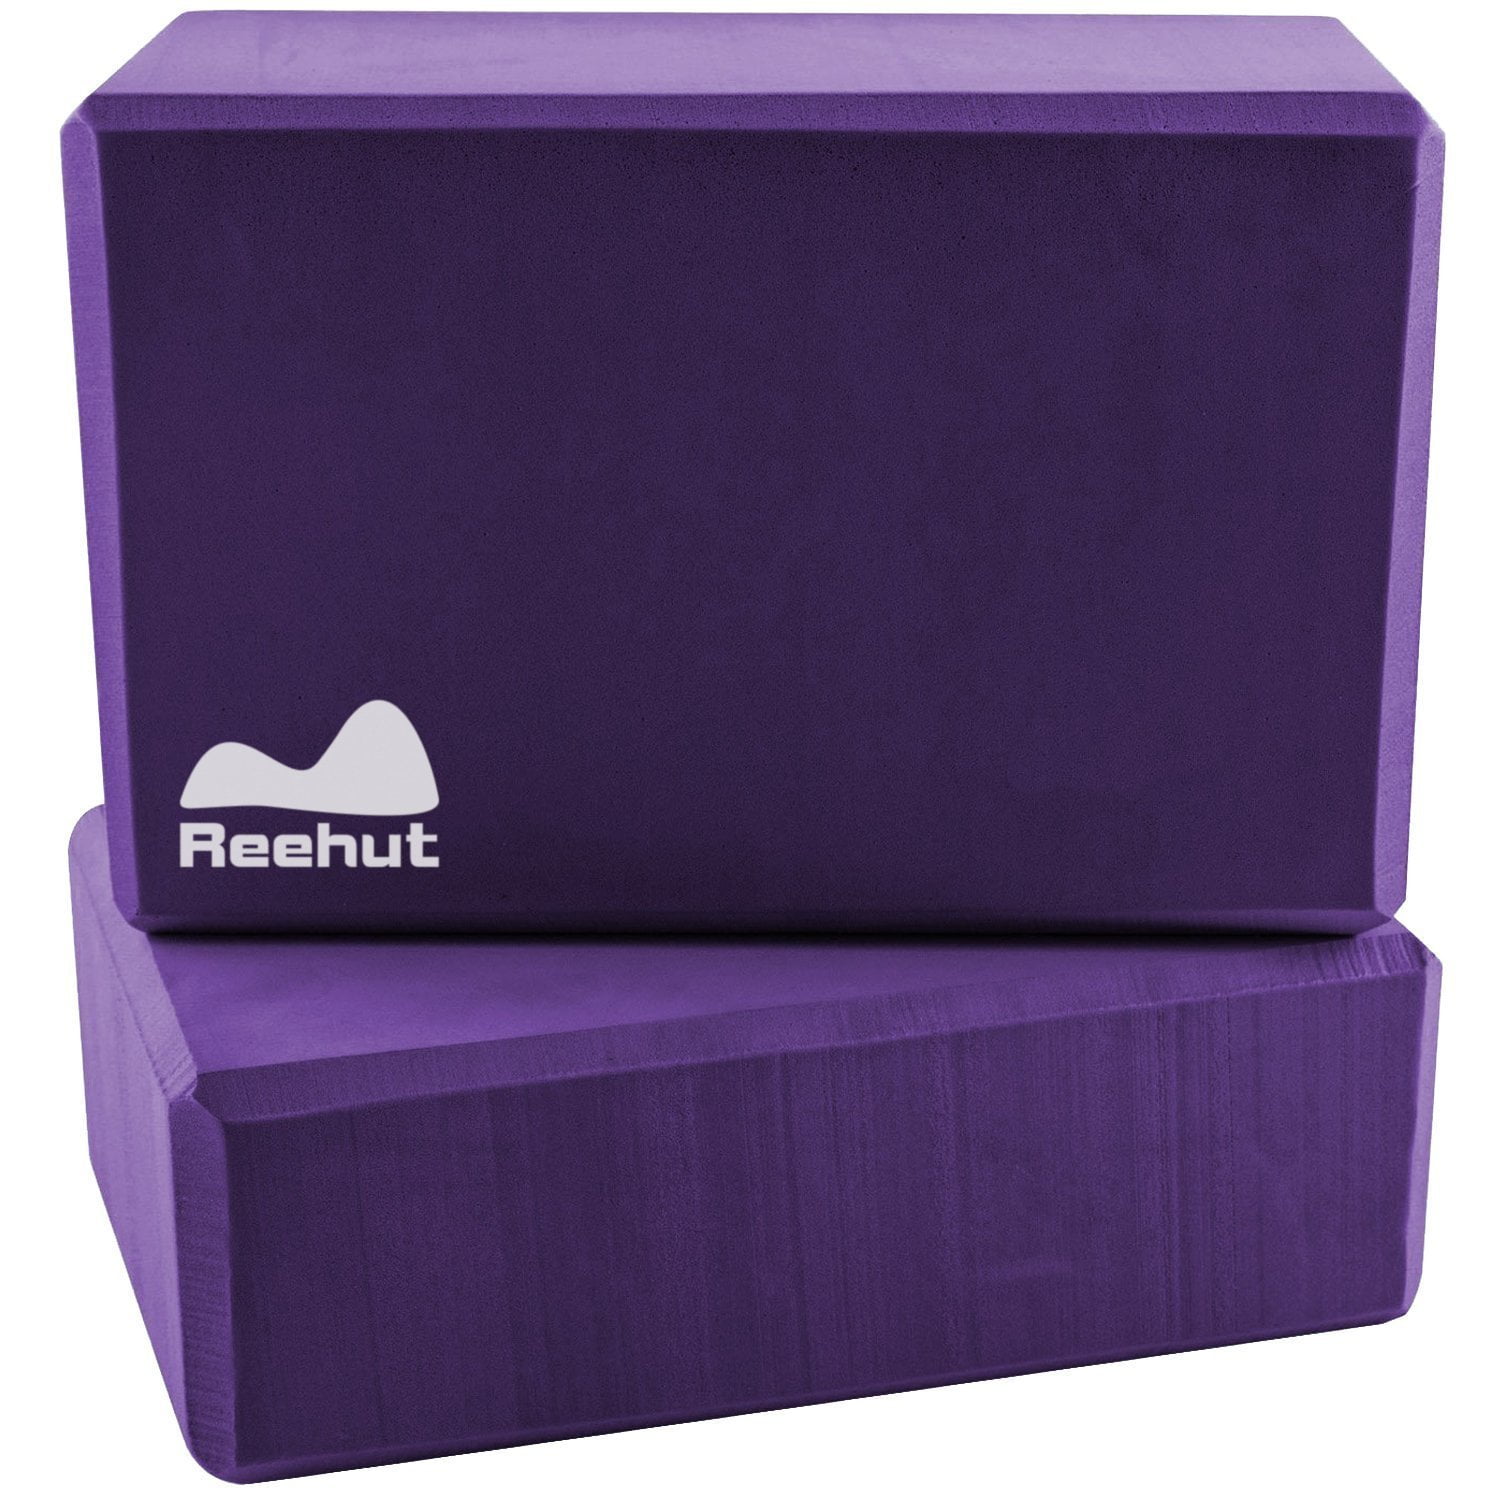 Reehut Yoga Block - High Density EVA Foam Block to Support and Deepen  Poses, Improve Strength and Aid Balance and Flexibility - Lightweight, Odor